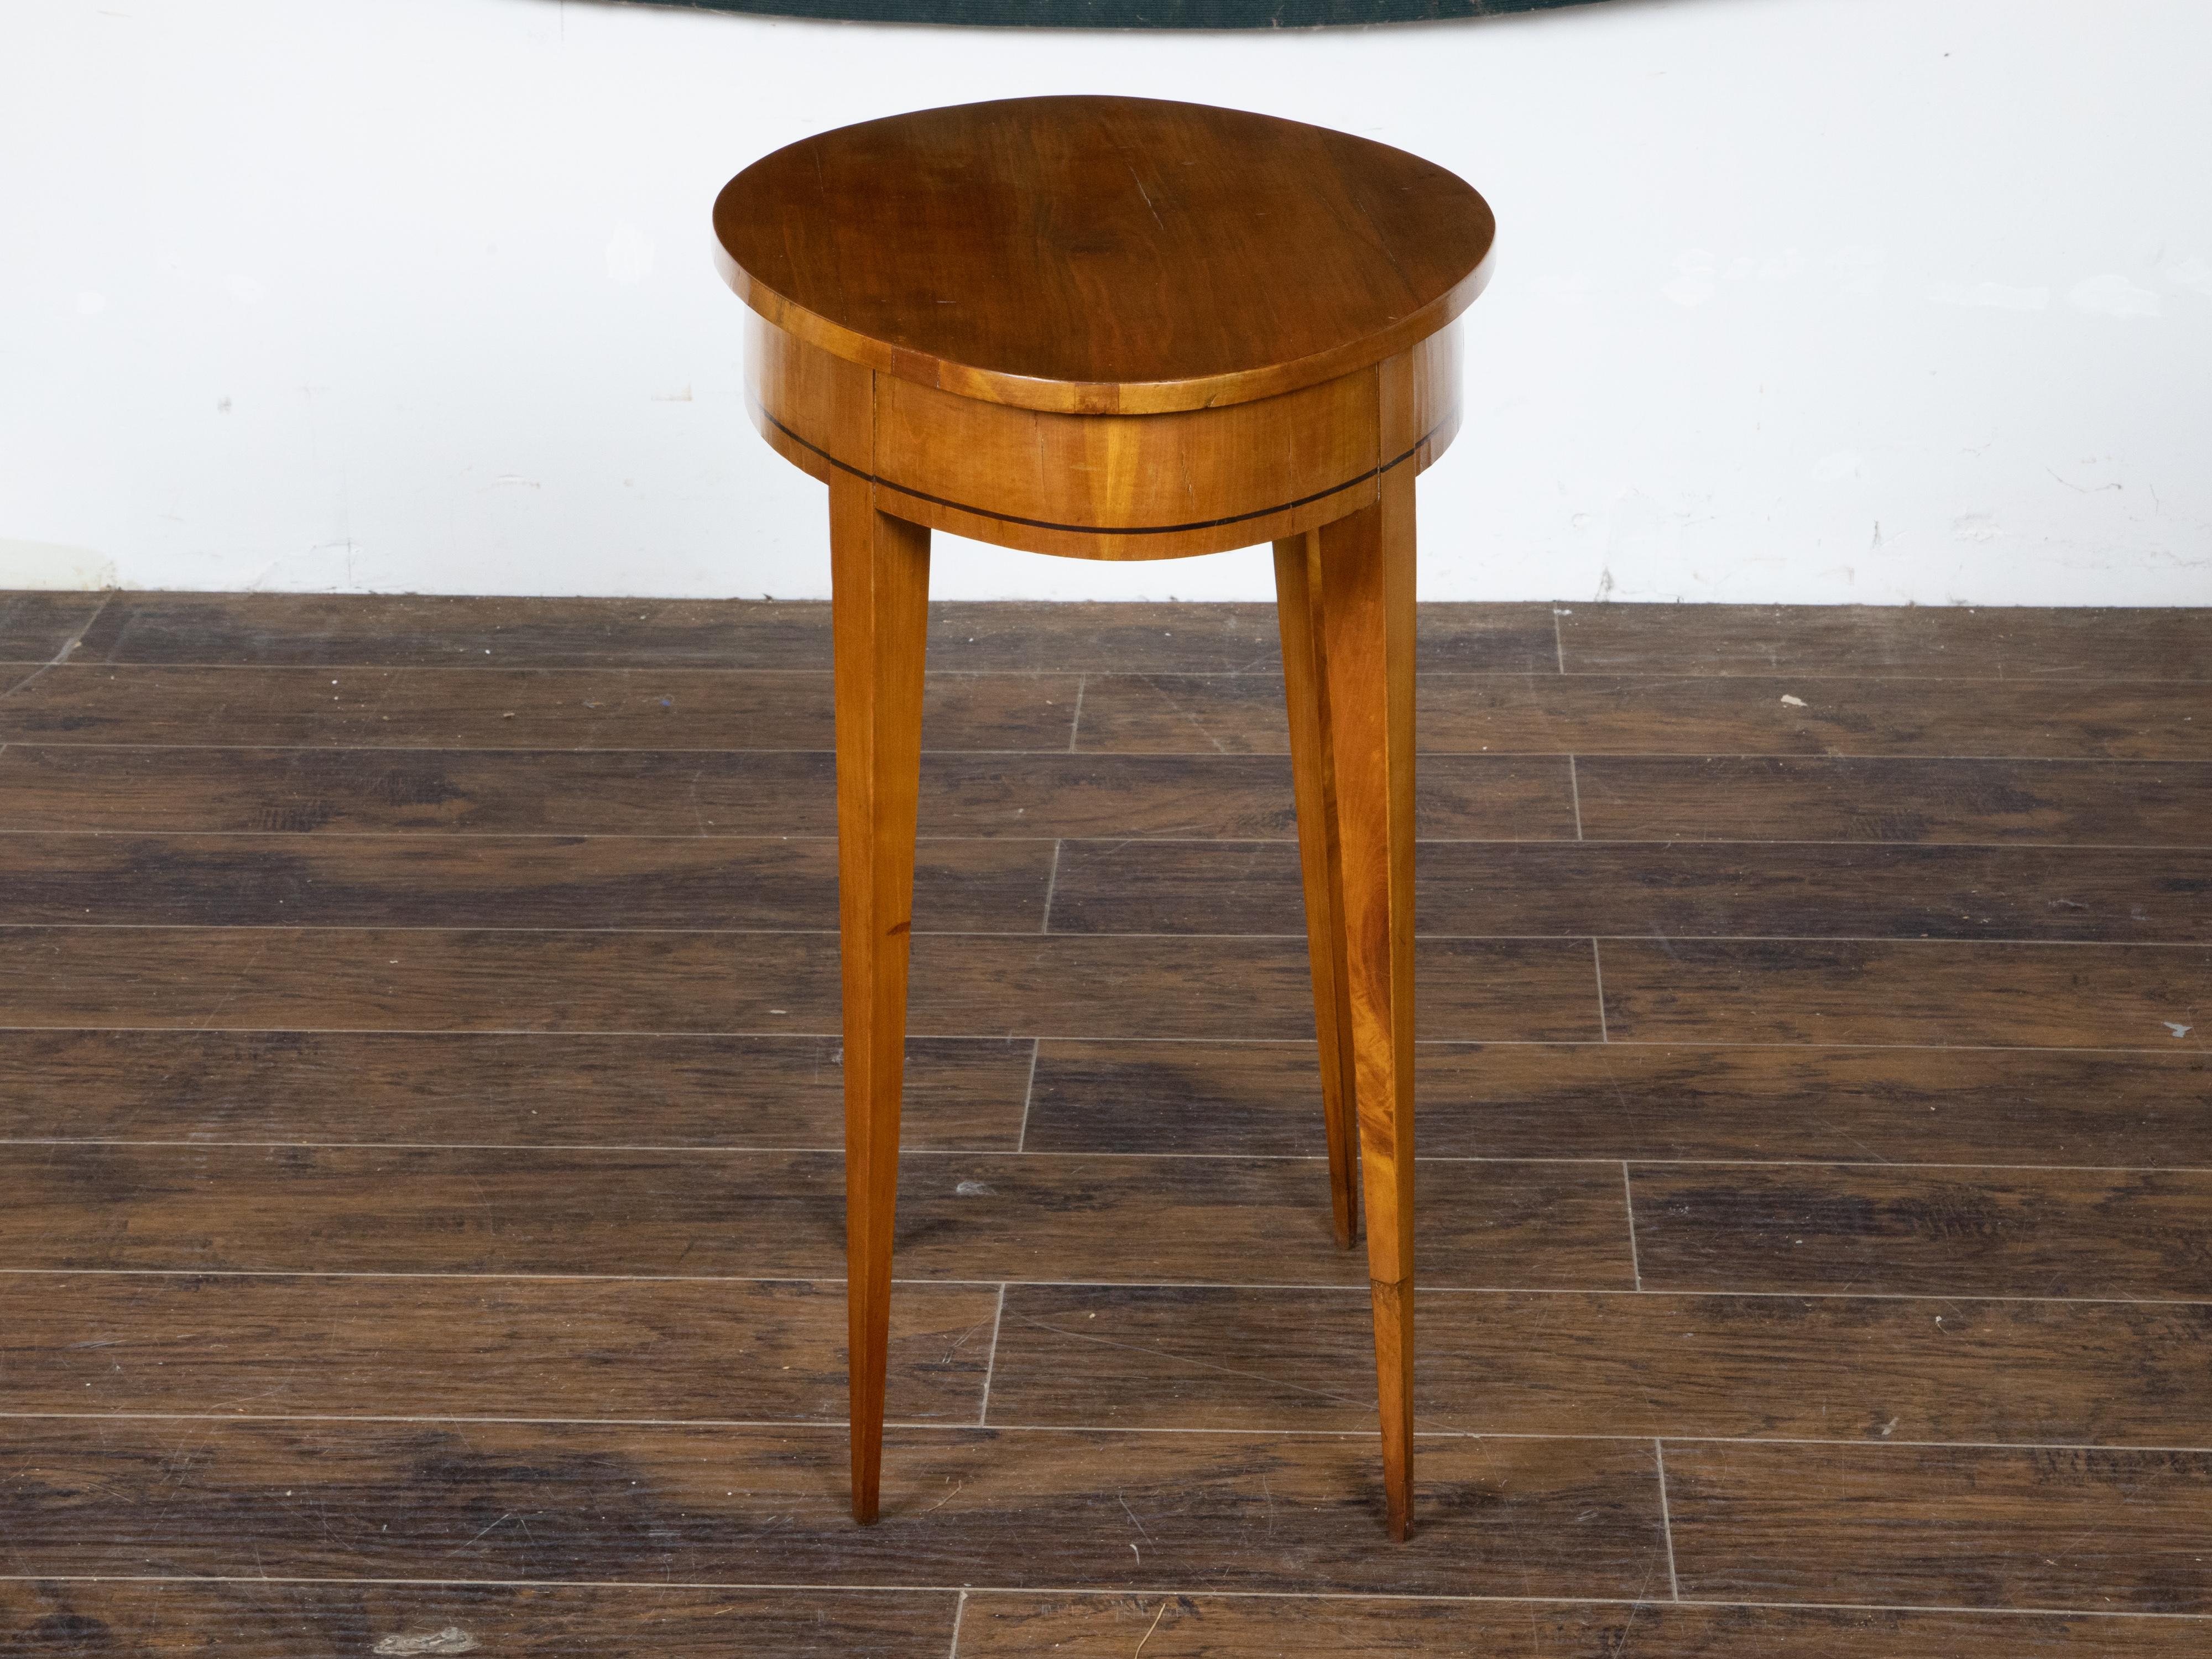 French Neoclassical Style 19th Century Walnut Table with Oval Top, Tapered Legs For Sale 4